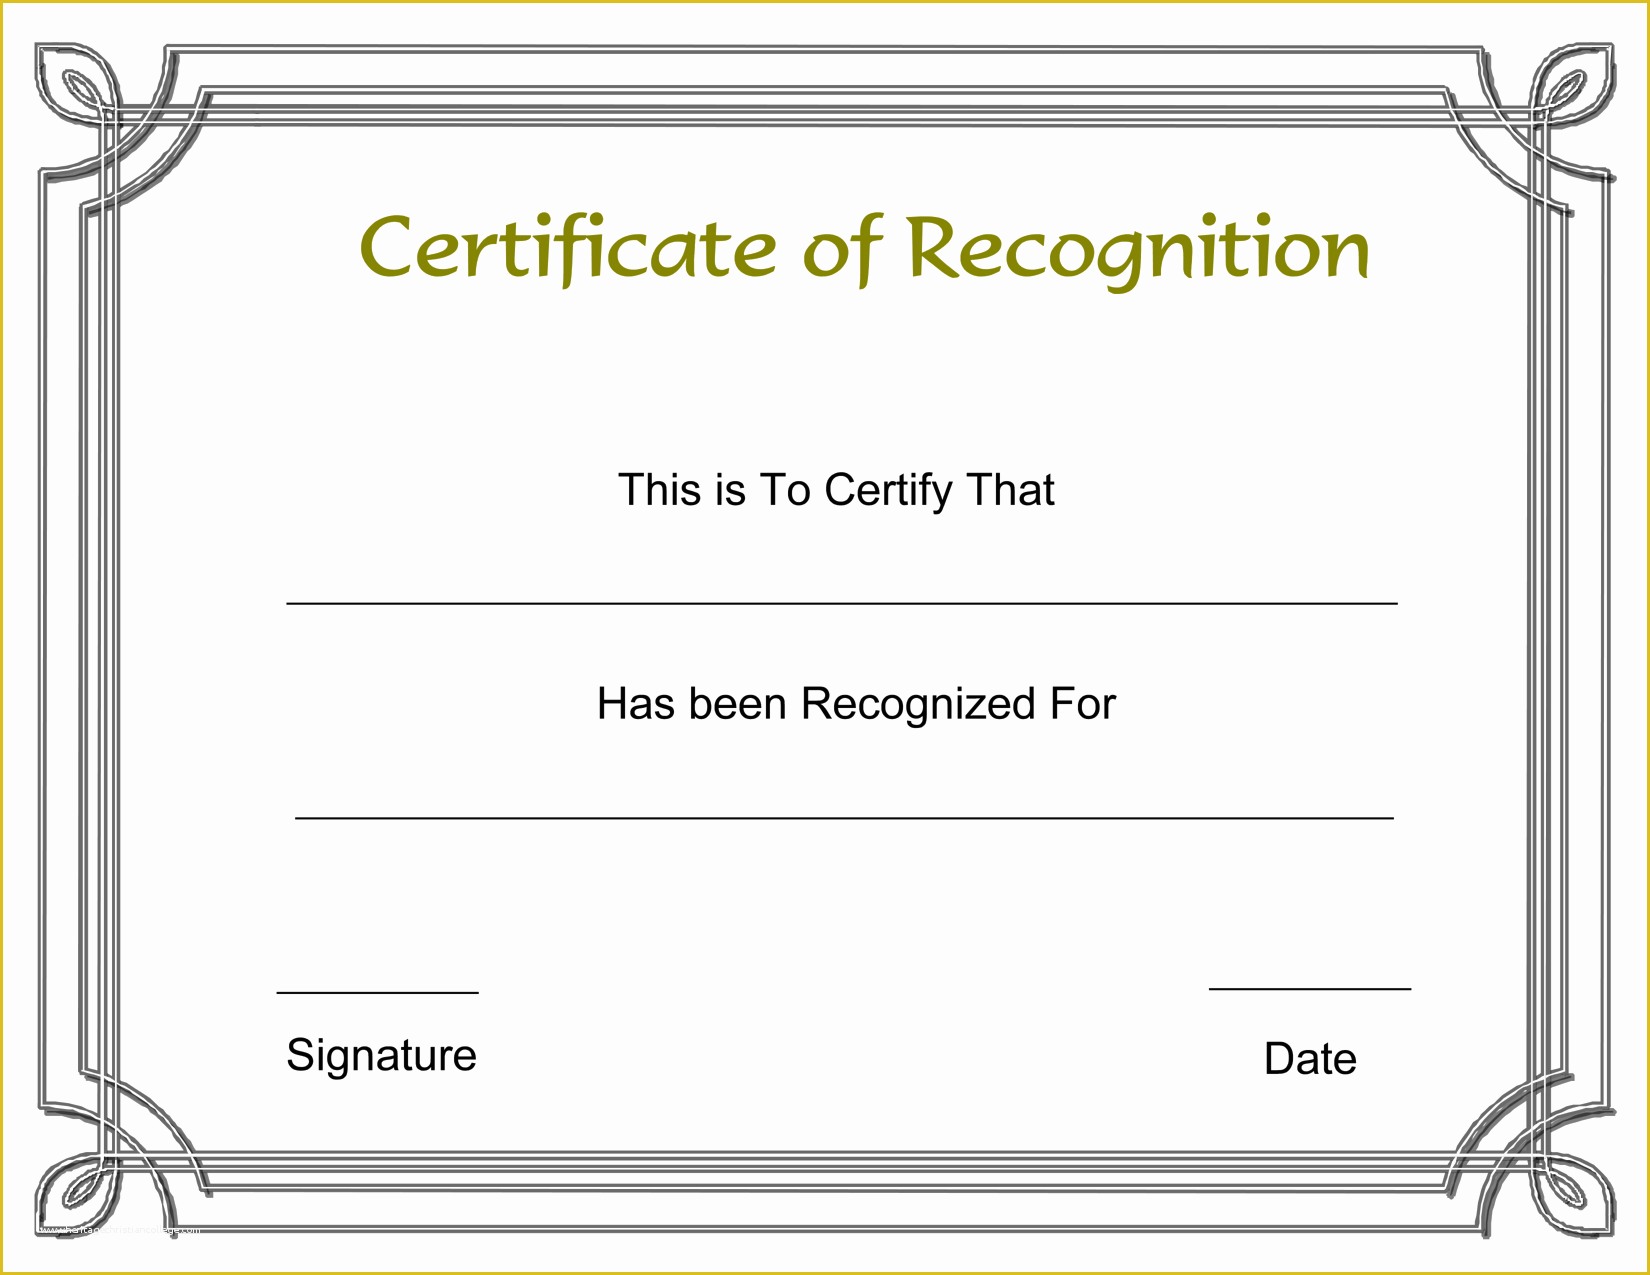 Certificate Of Recognition Template Free Of 8 Best Of Recognition Award Certificate Templates